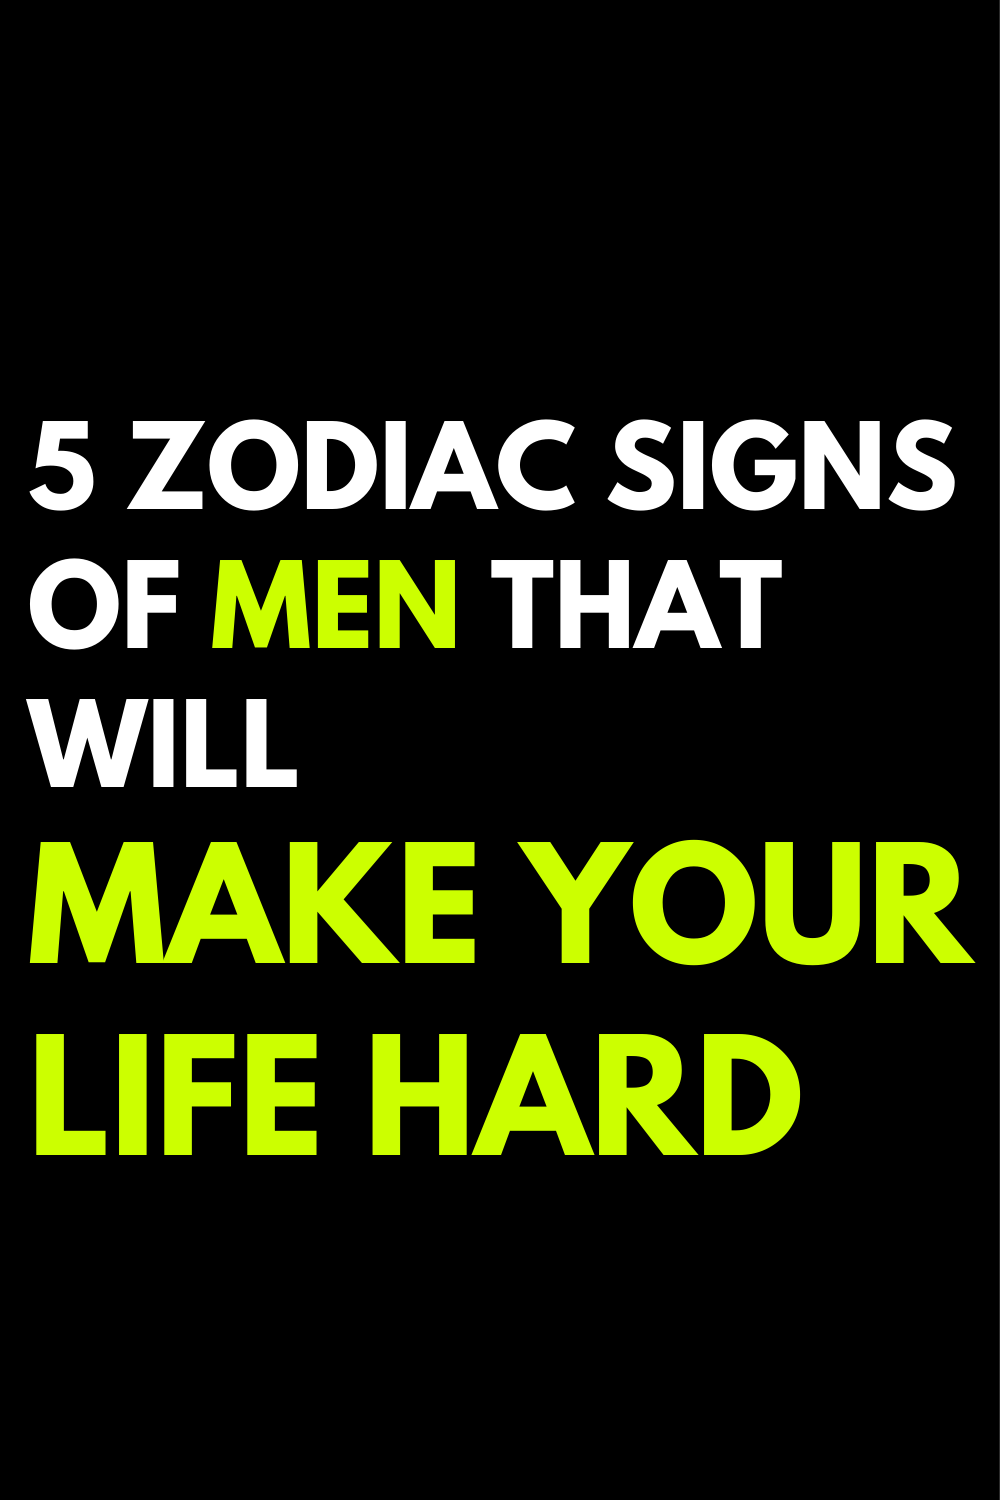 5 zodiac signs of men that will make your life hard